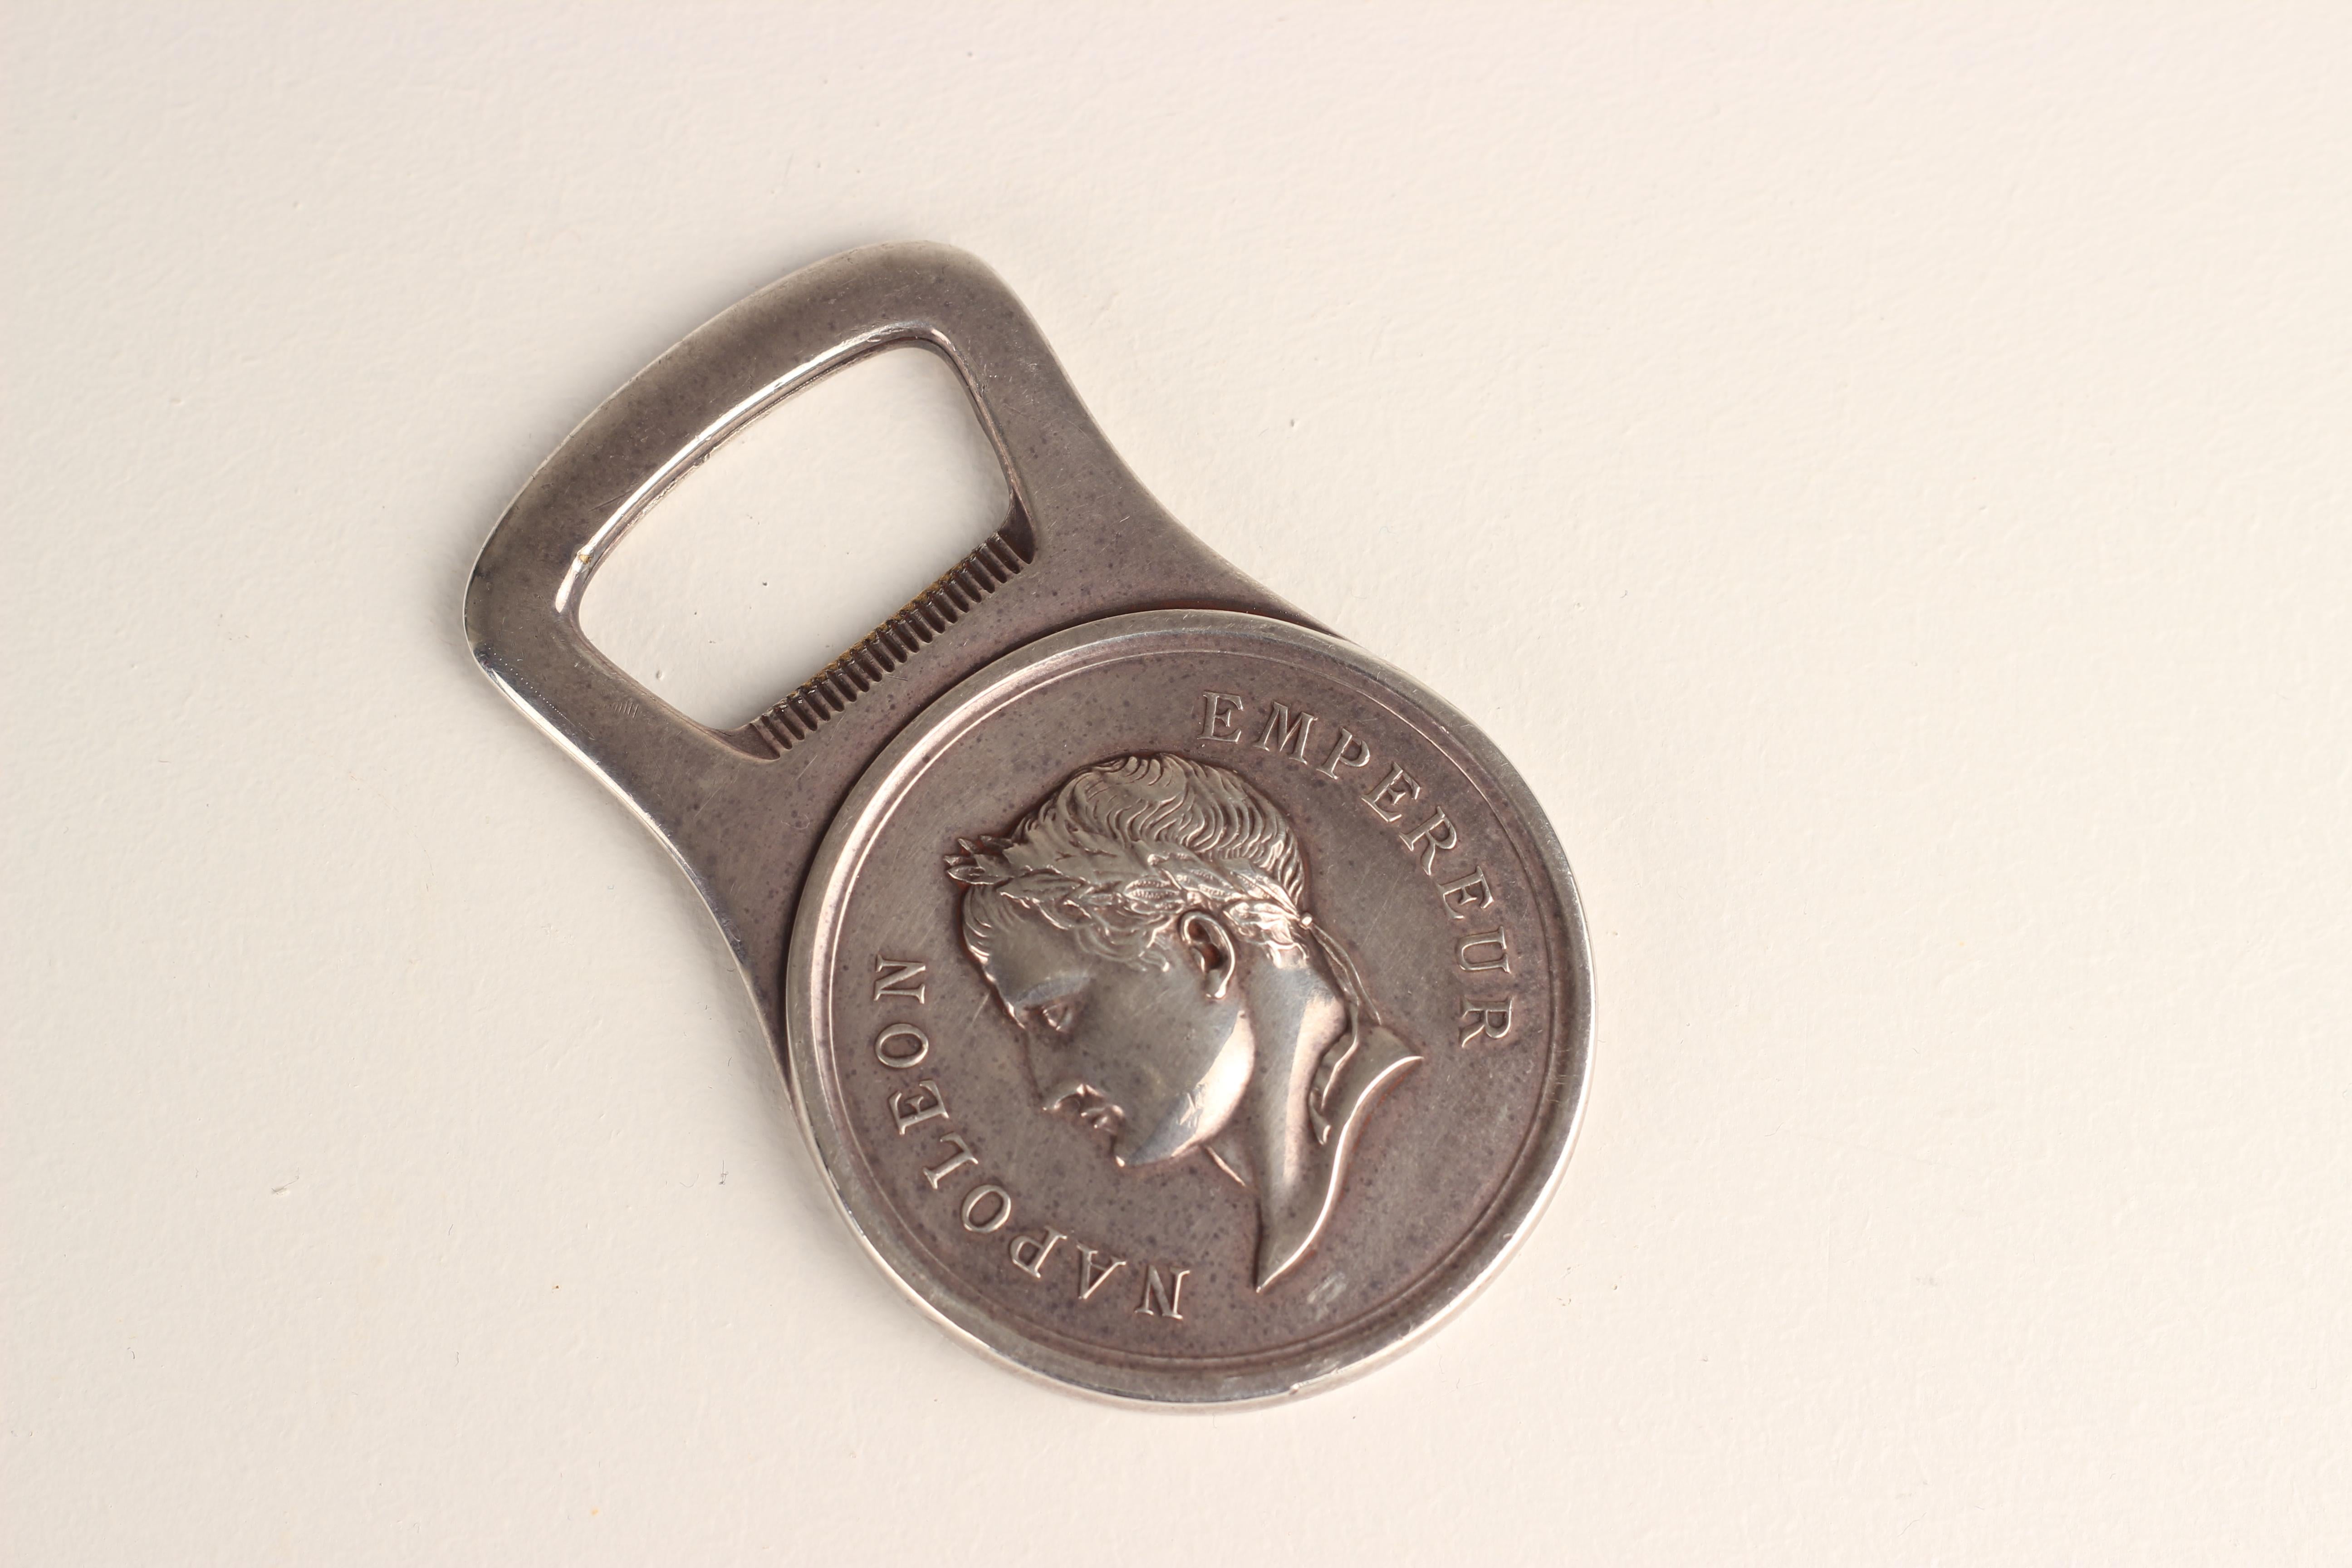 Silverplated bottle opener by Christfole, Gallia collection, representing a medal with the French Emperor Napoleon in profile and the inscription 